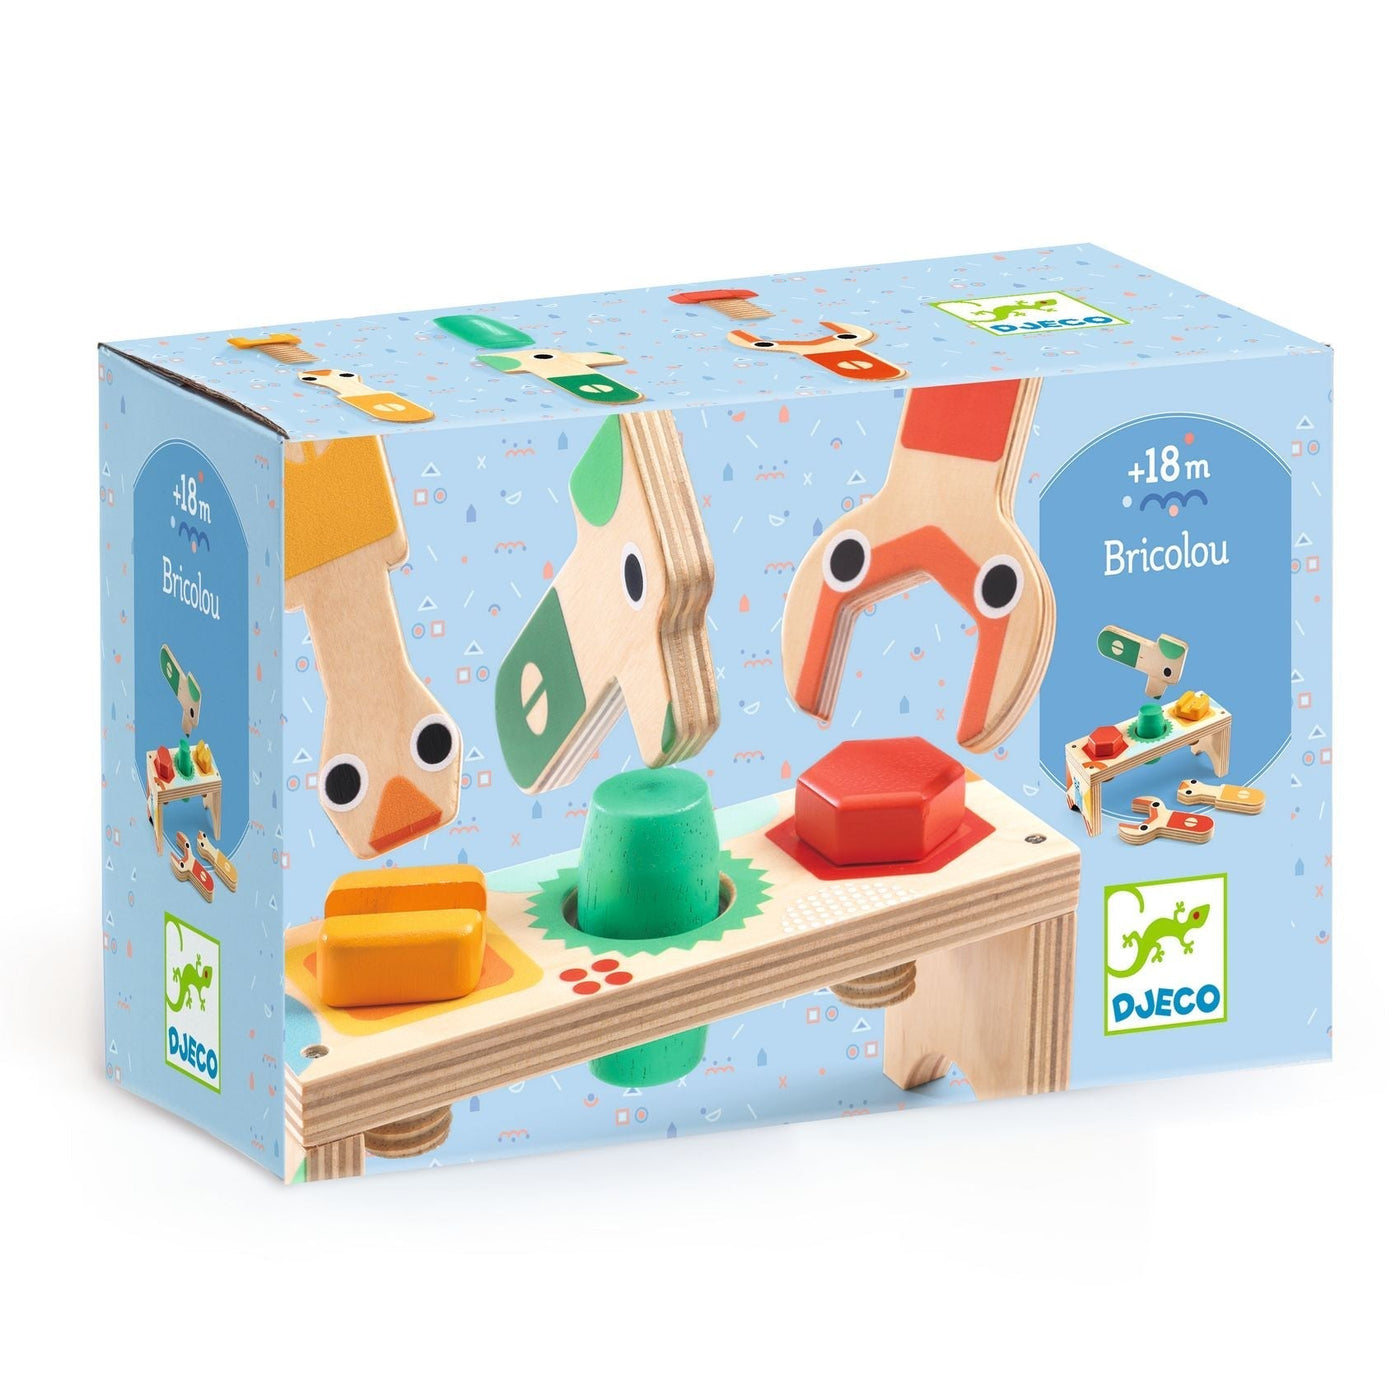 Bricolou - Early Years - Early Development Toys